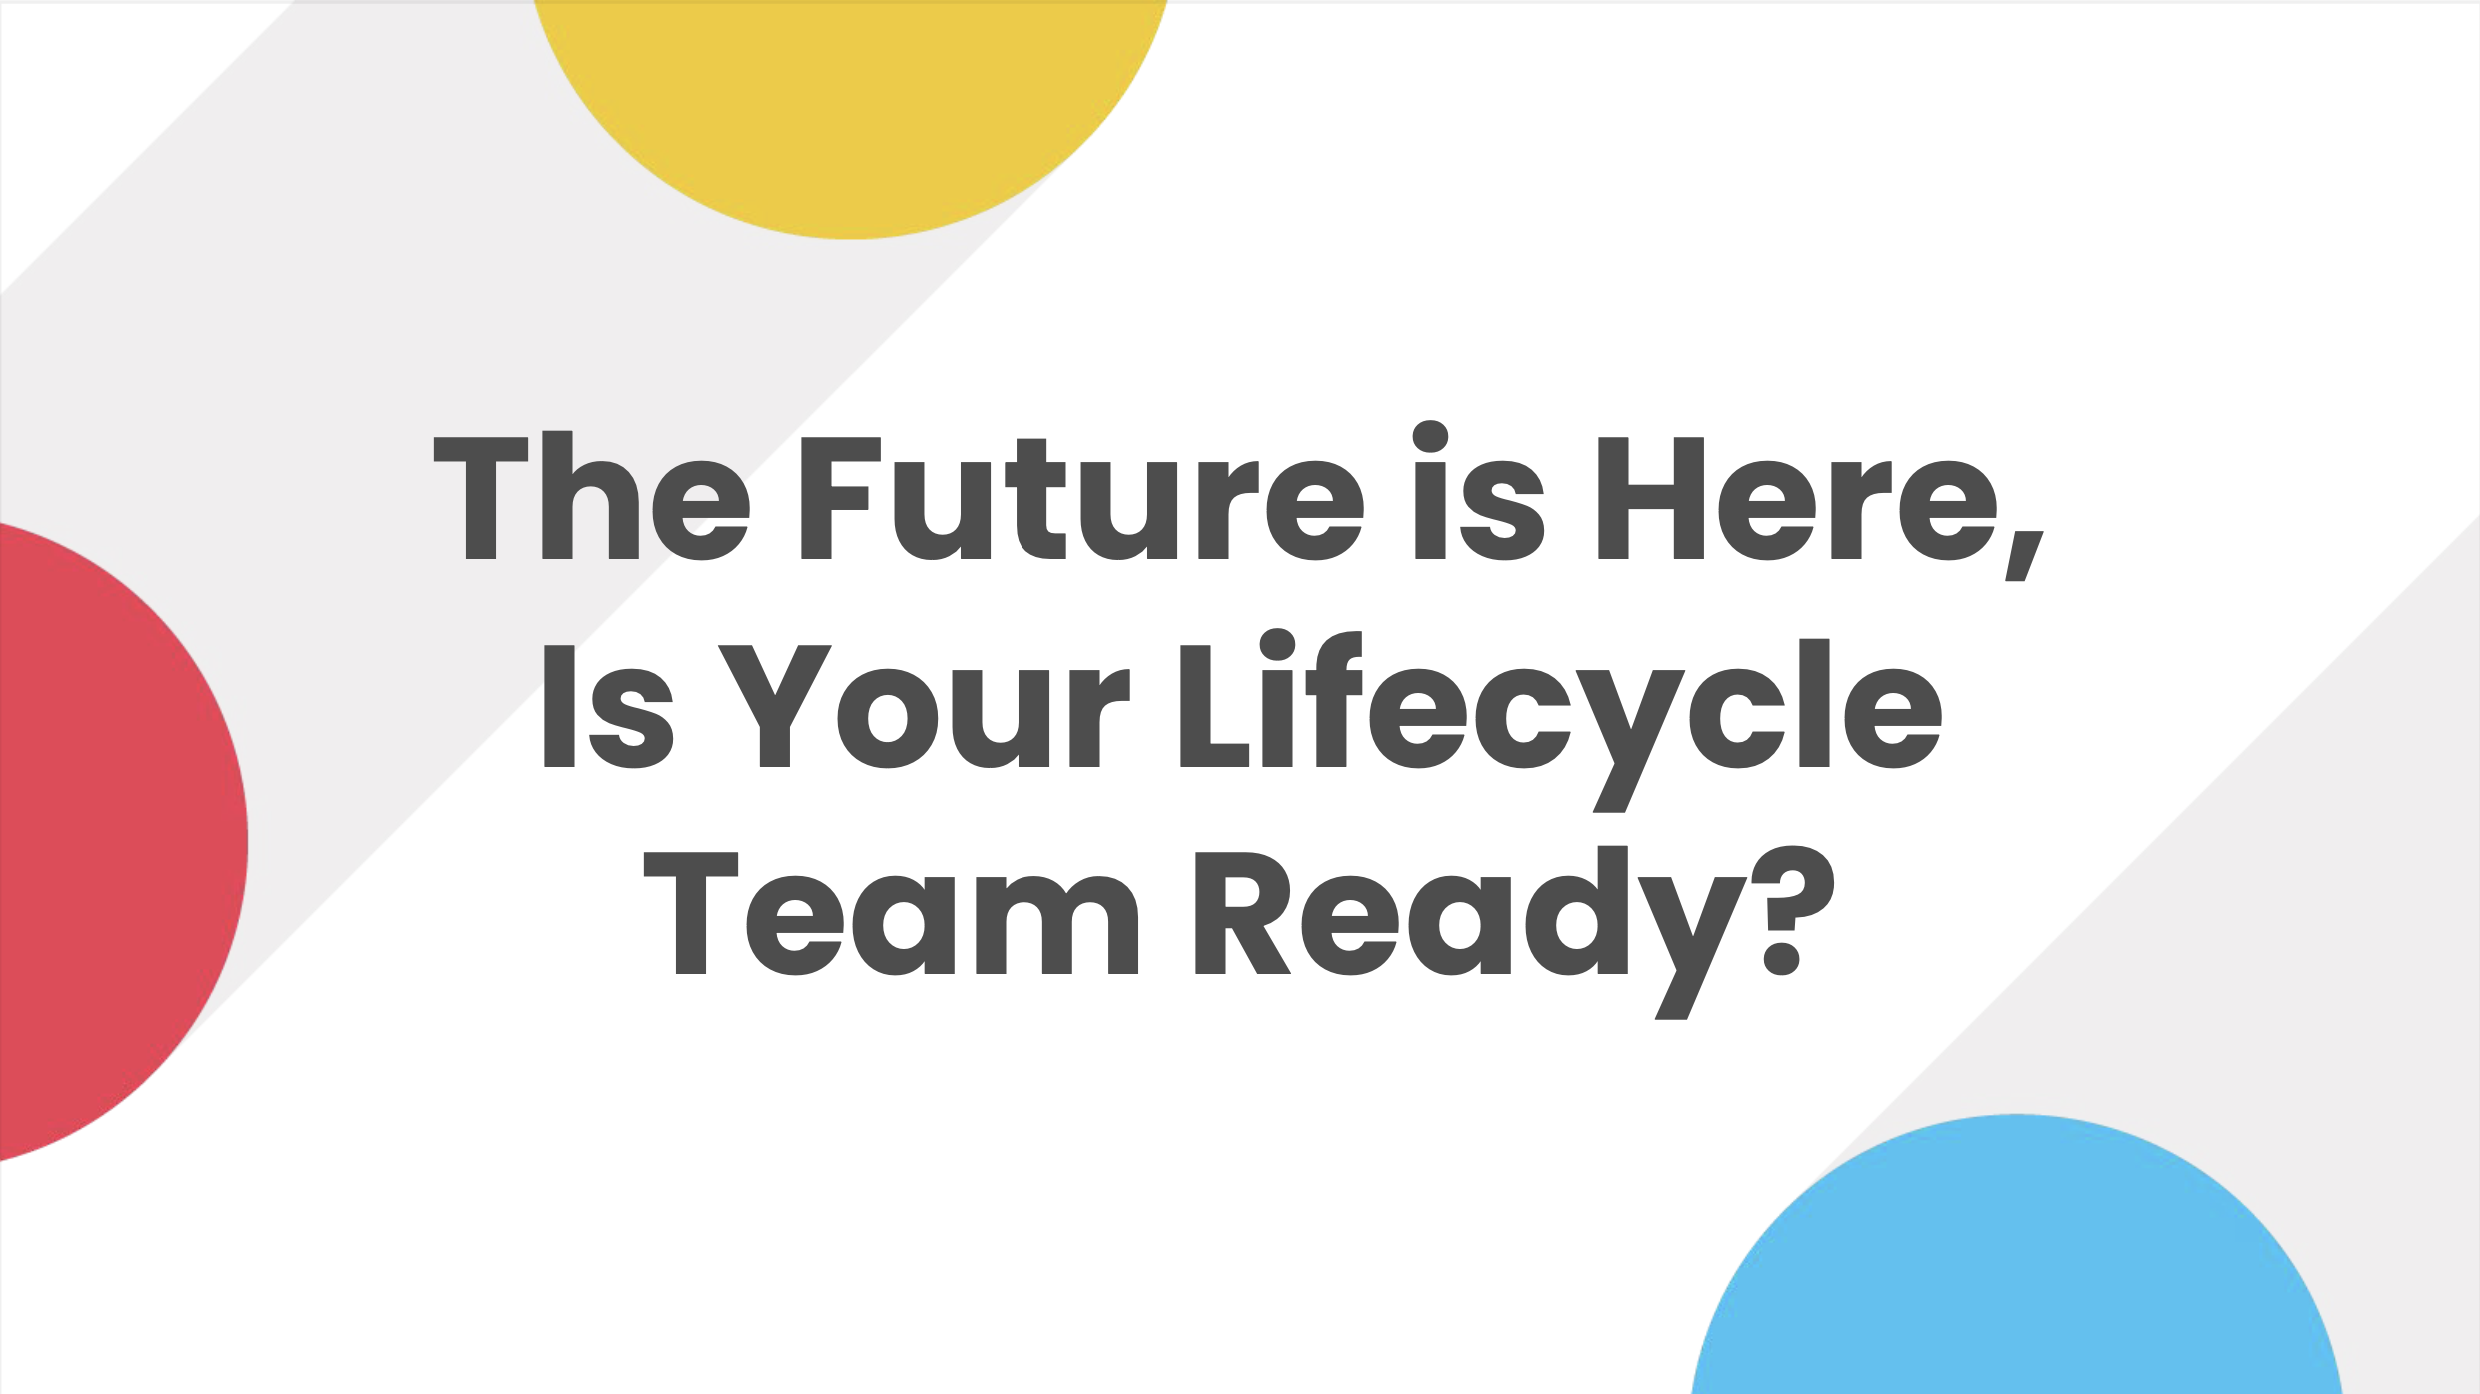 The Future is Here, is Your Lifecycle Team Ready?